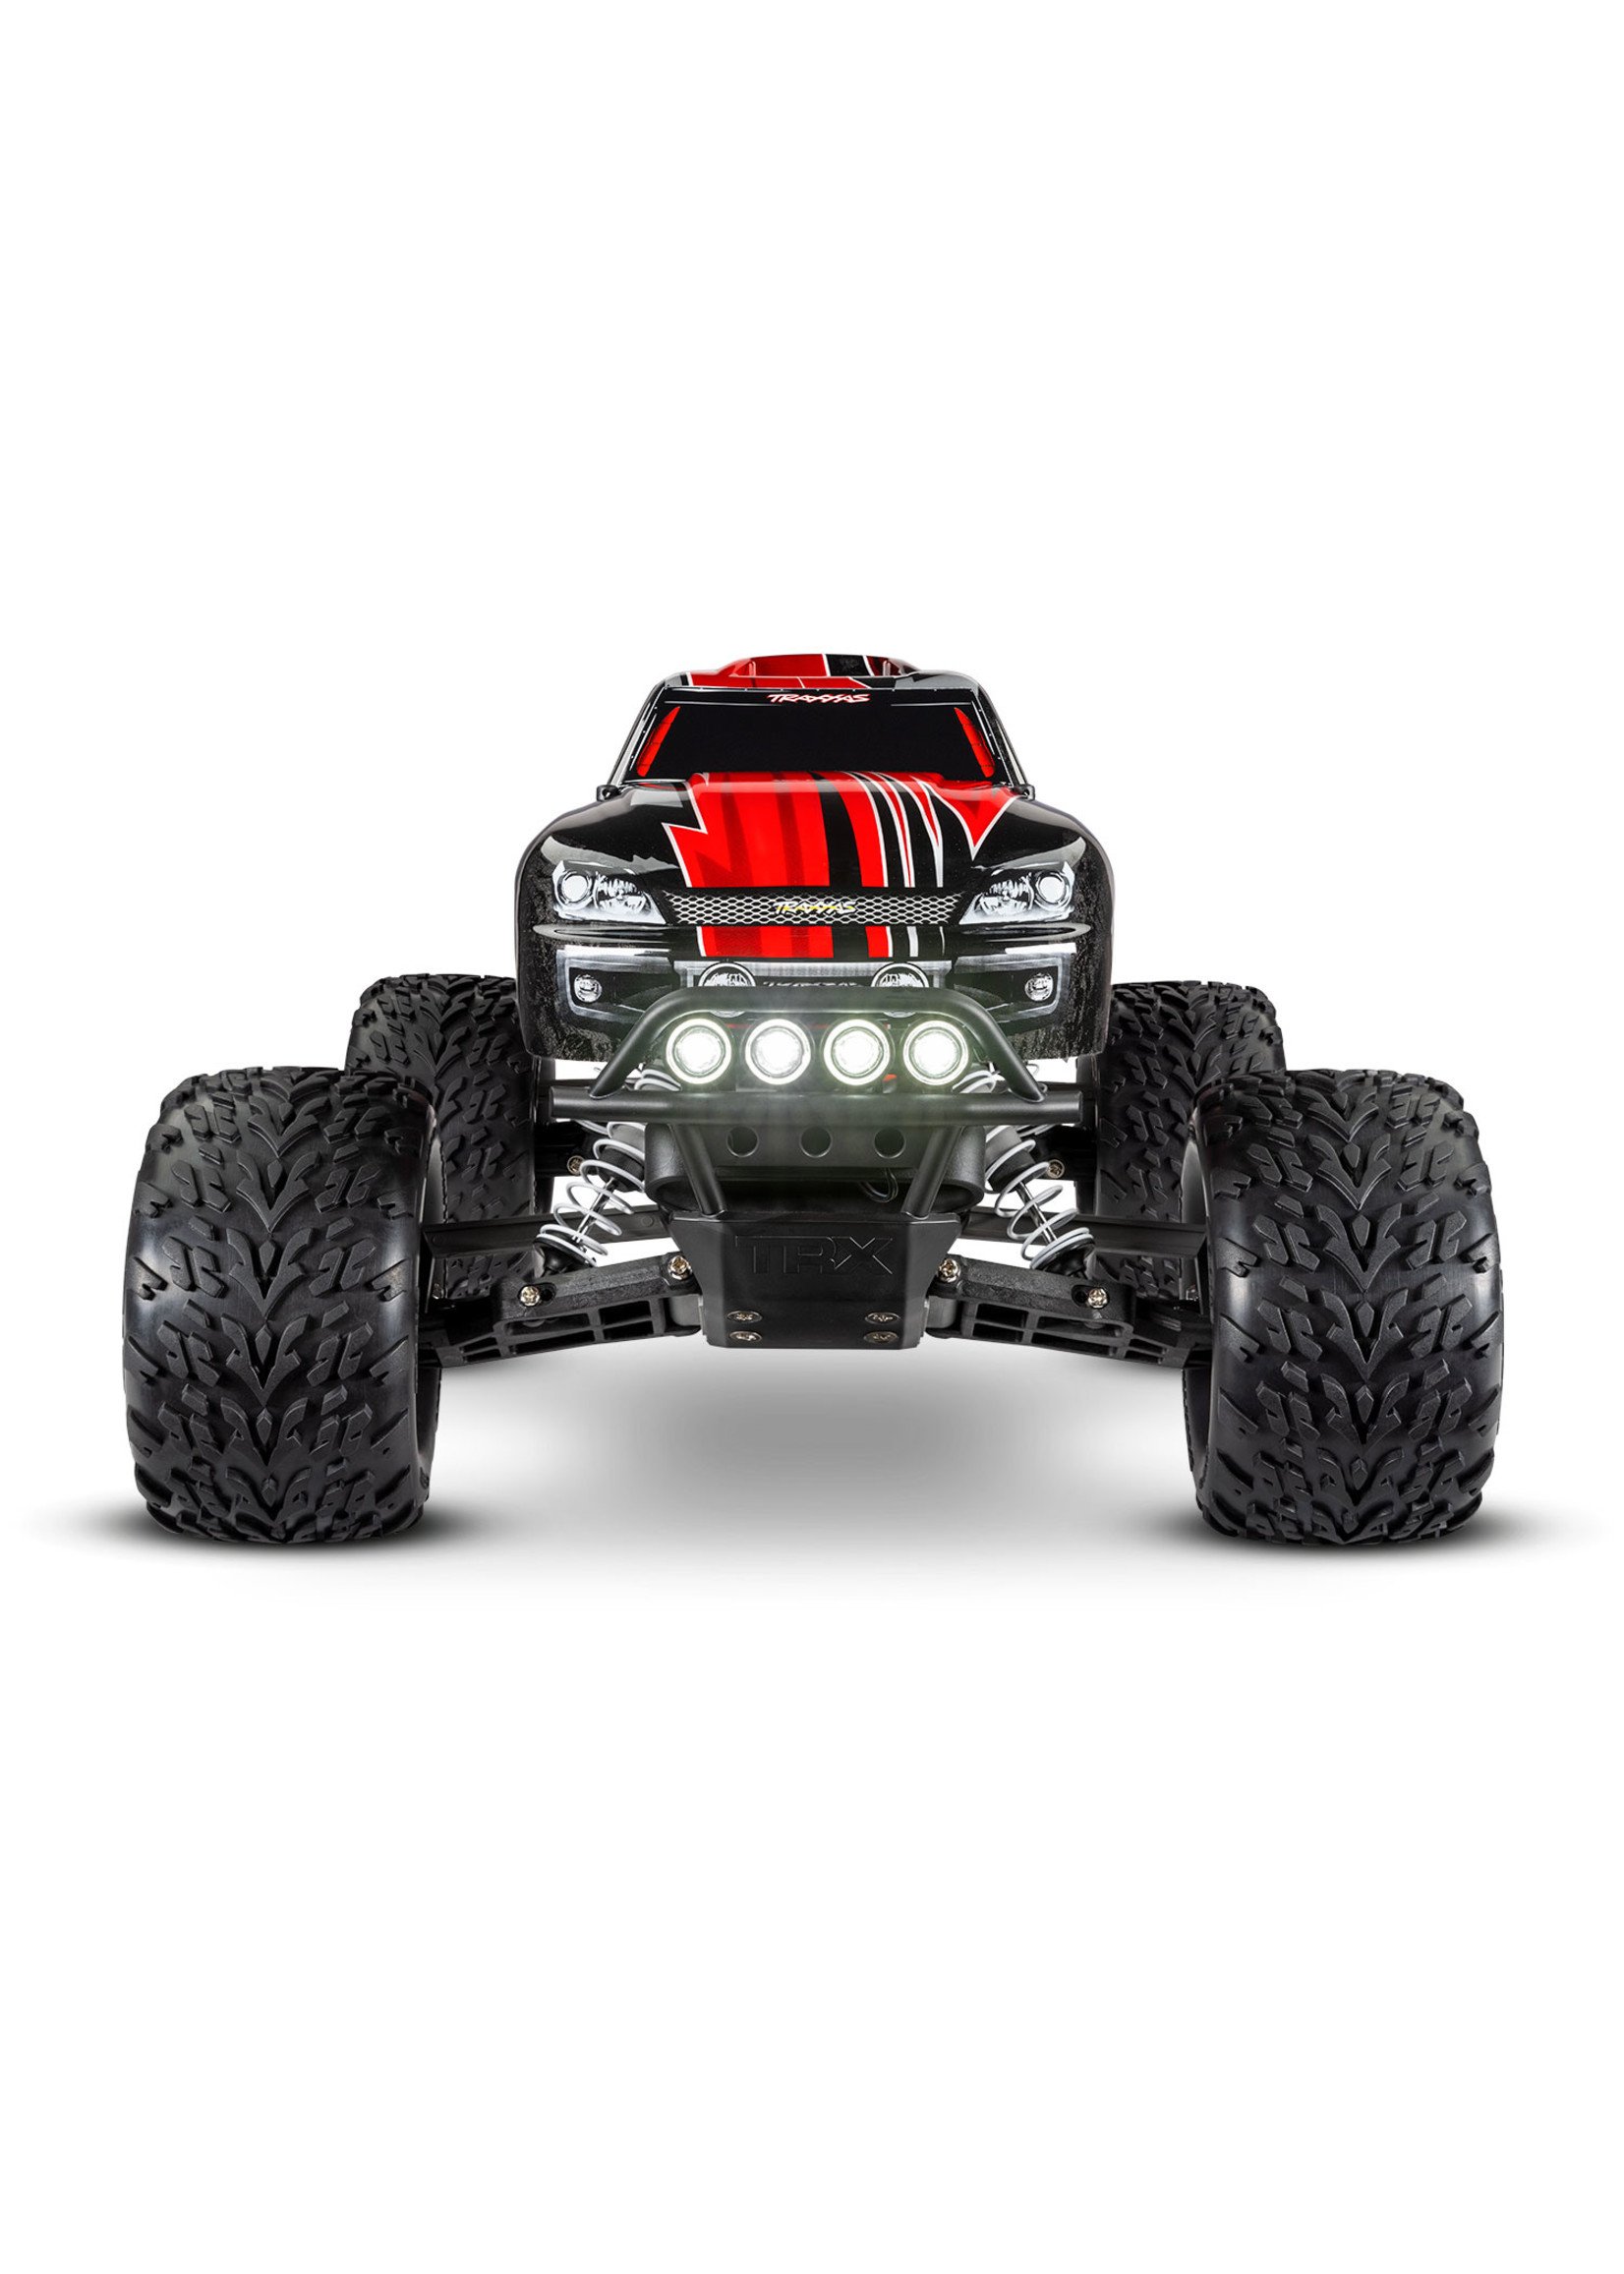 Traxxas 1/10 Stampede 2WD RTR Monster Truck with Lights - Red